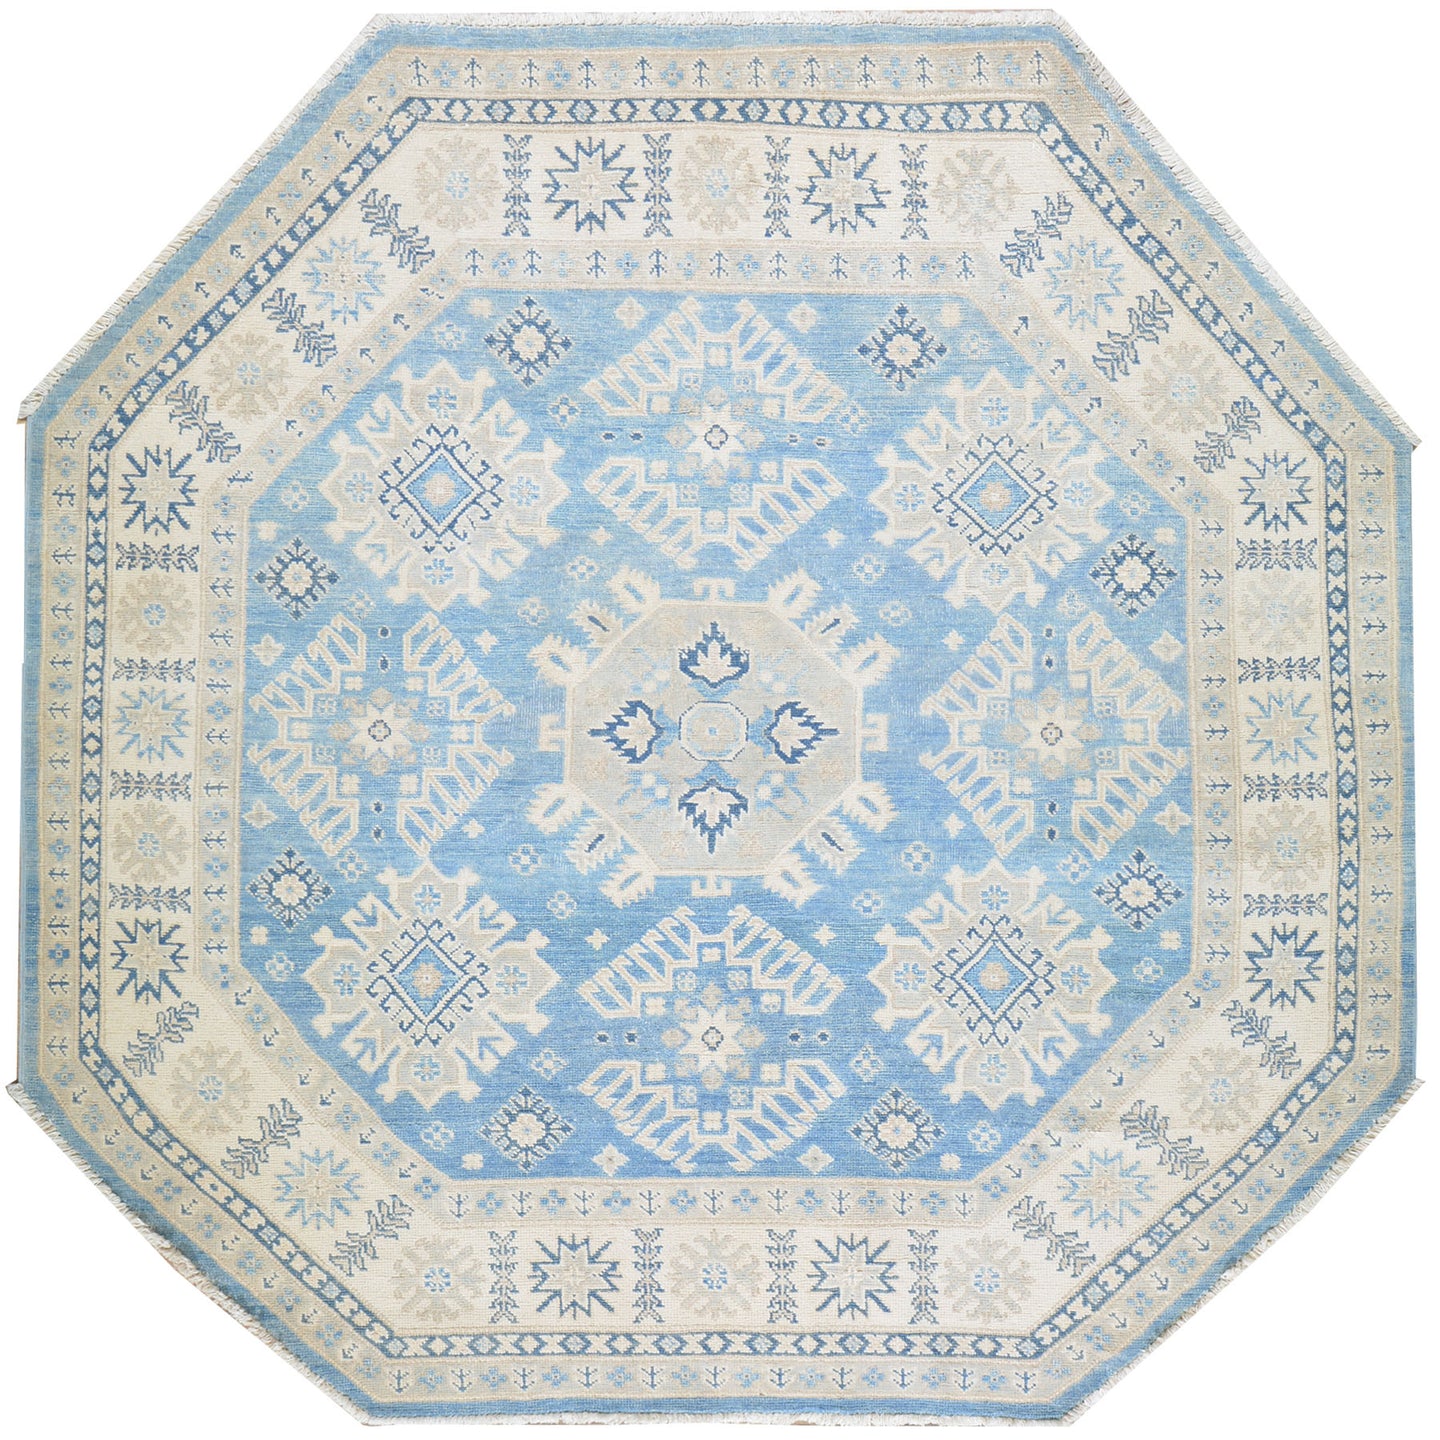 Hand-Knotted Octagon Vintage Look Kazak Design Wool Rug (Size 6.0 X 6.0) Cwral-7947